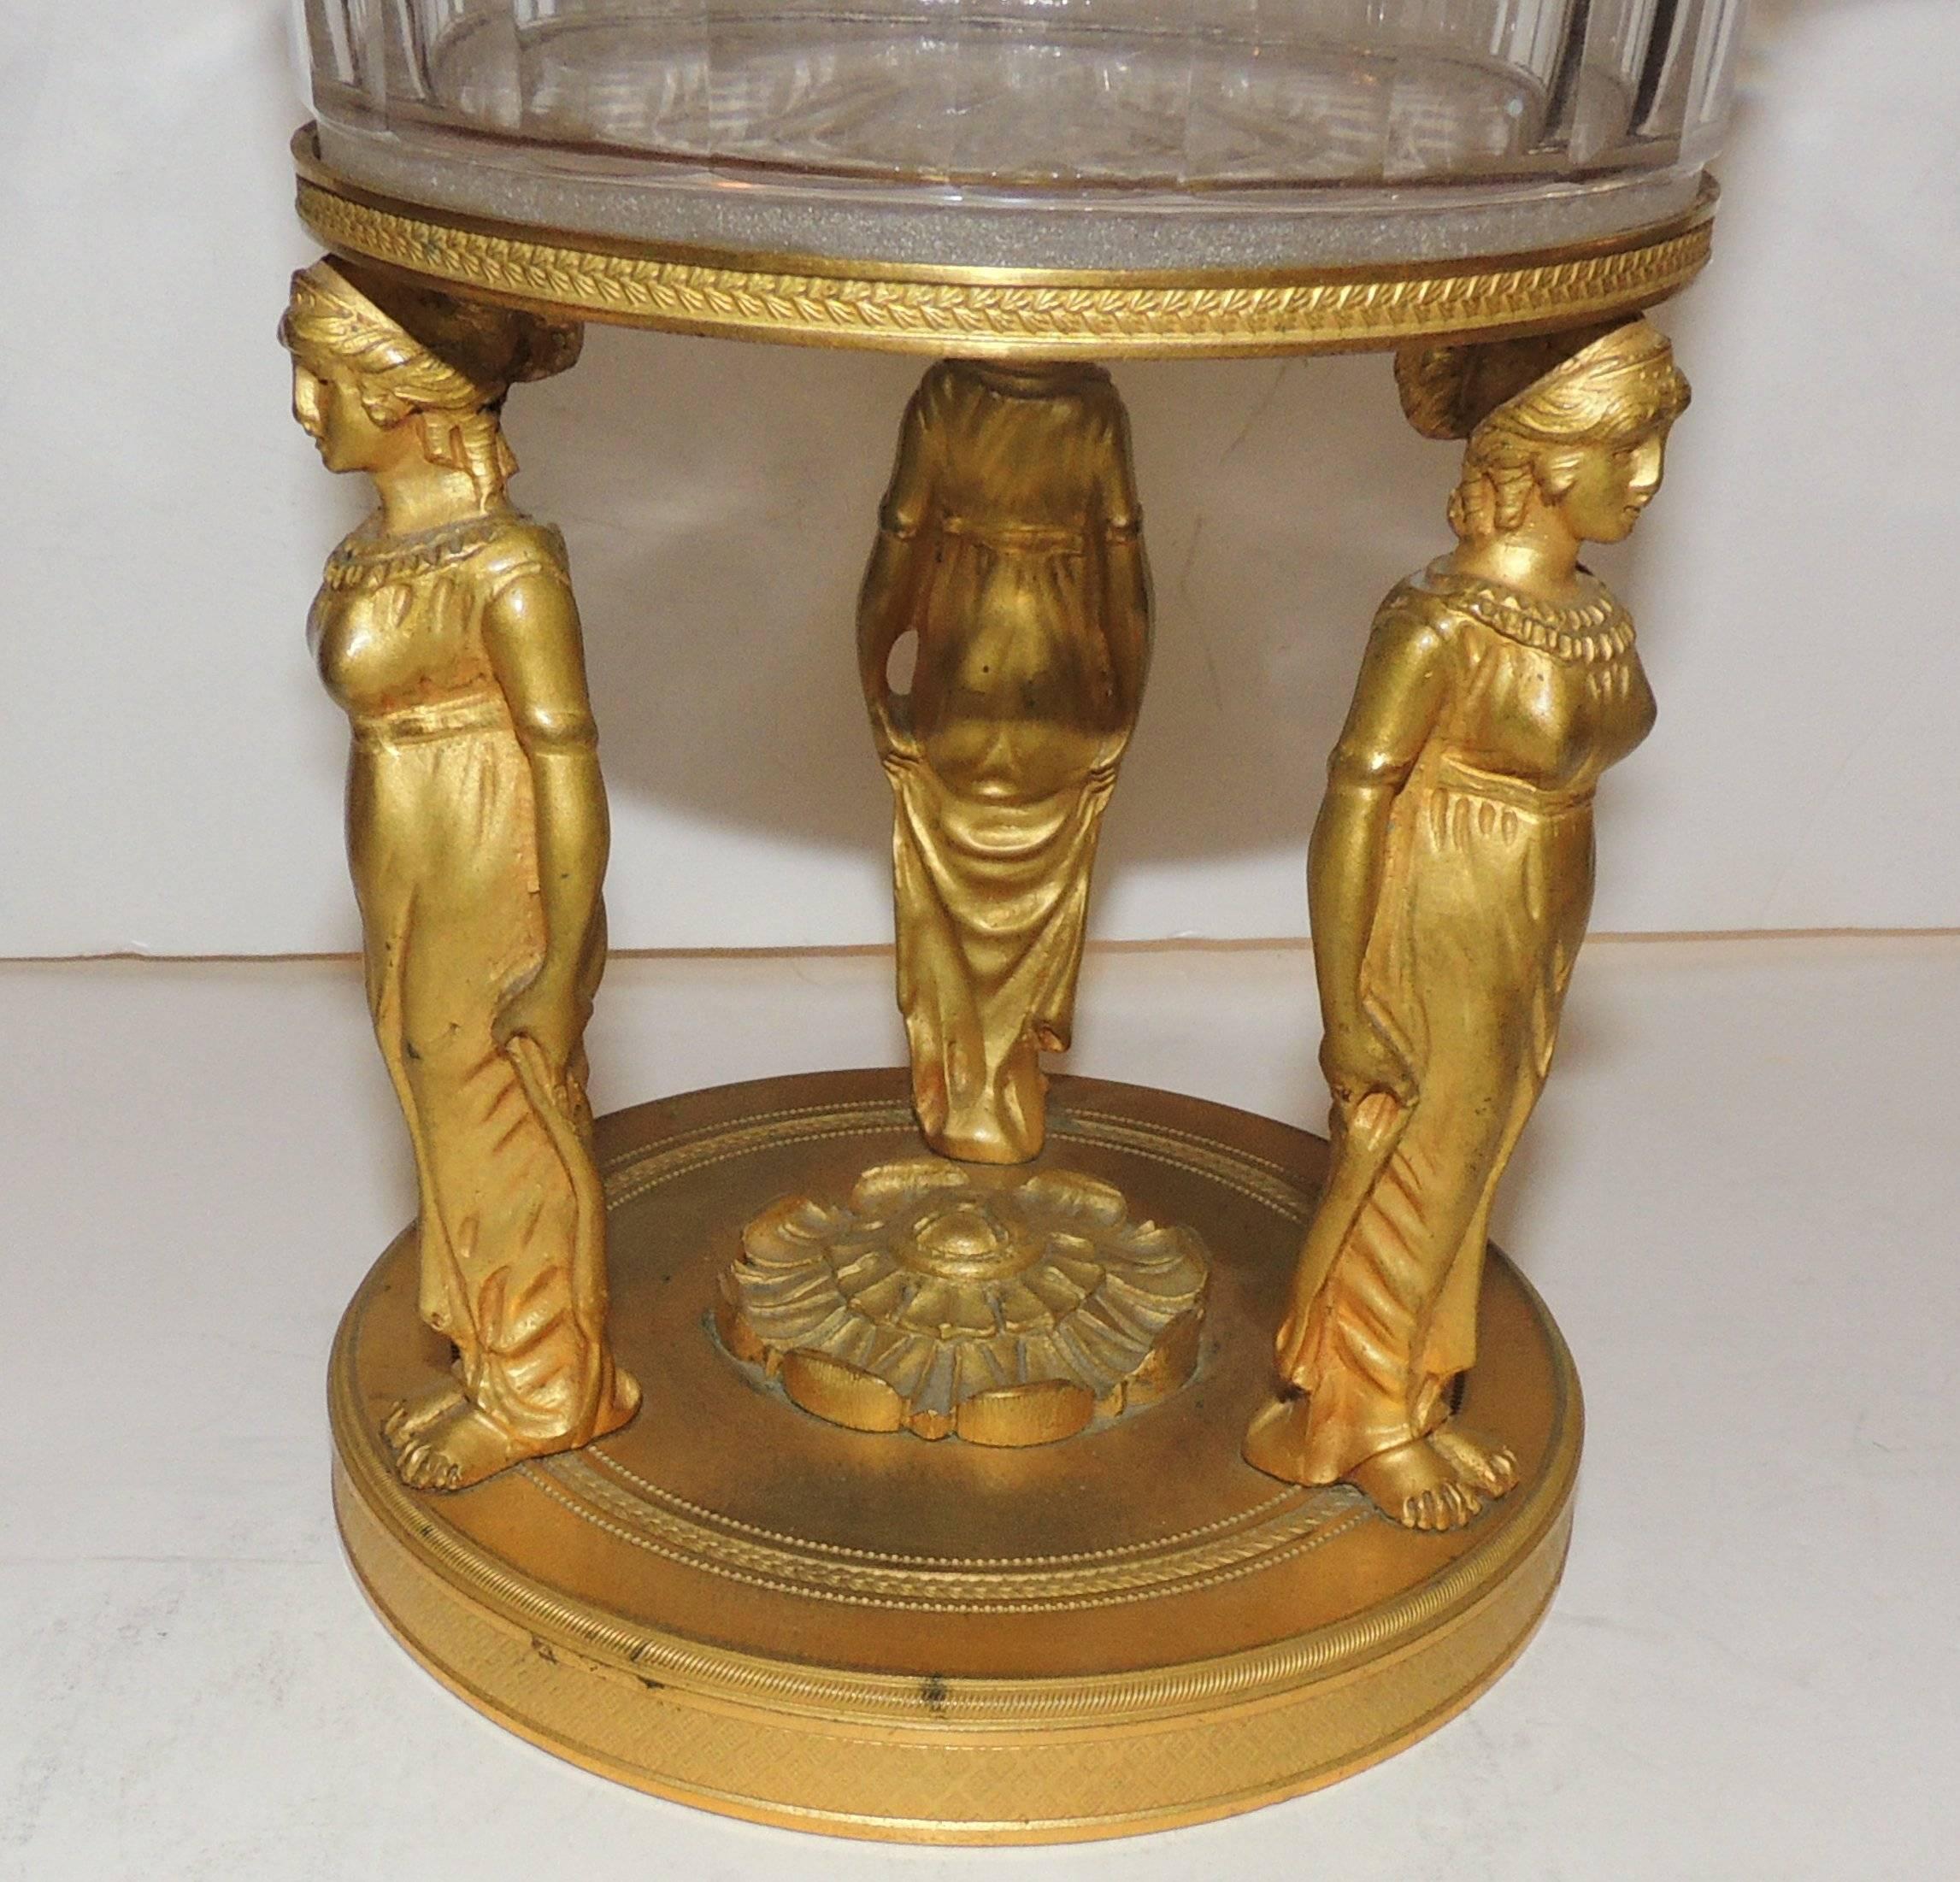 Wonderful French Empire Dore Bronze Cut Crystal Figural Neoclassical Centrepiece For Sale 2